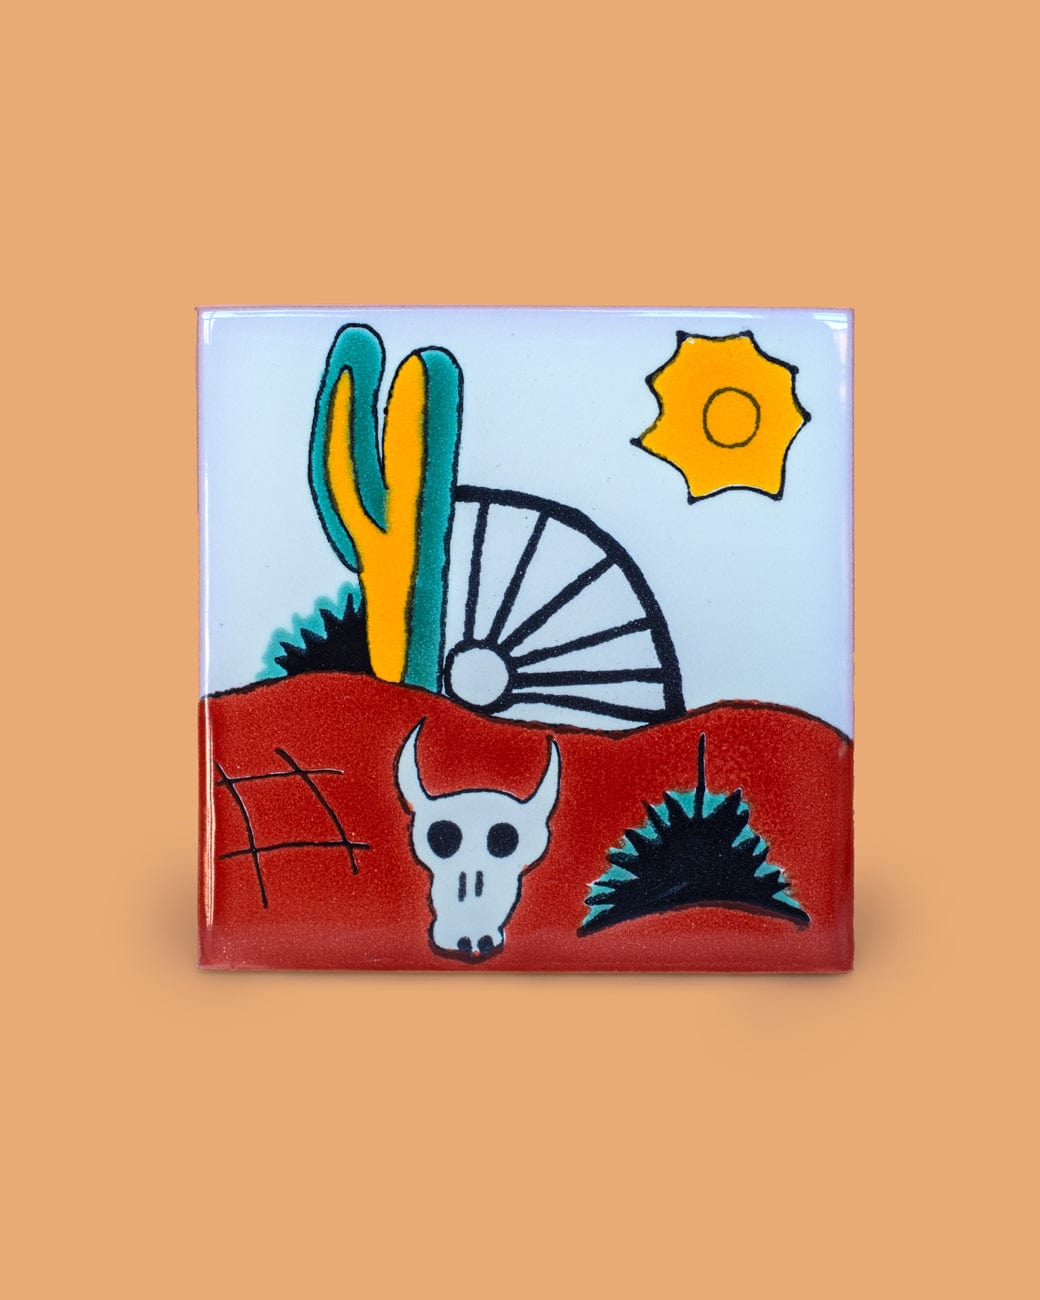 Handcrafted Cactus Tile